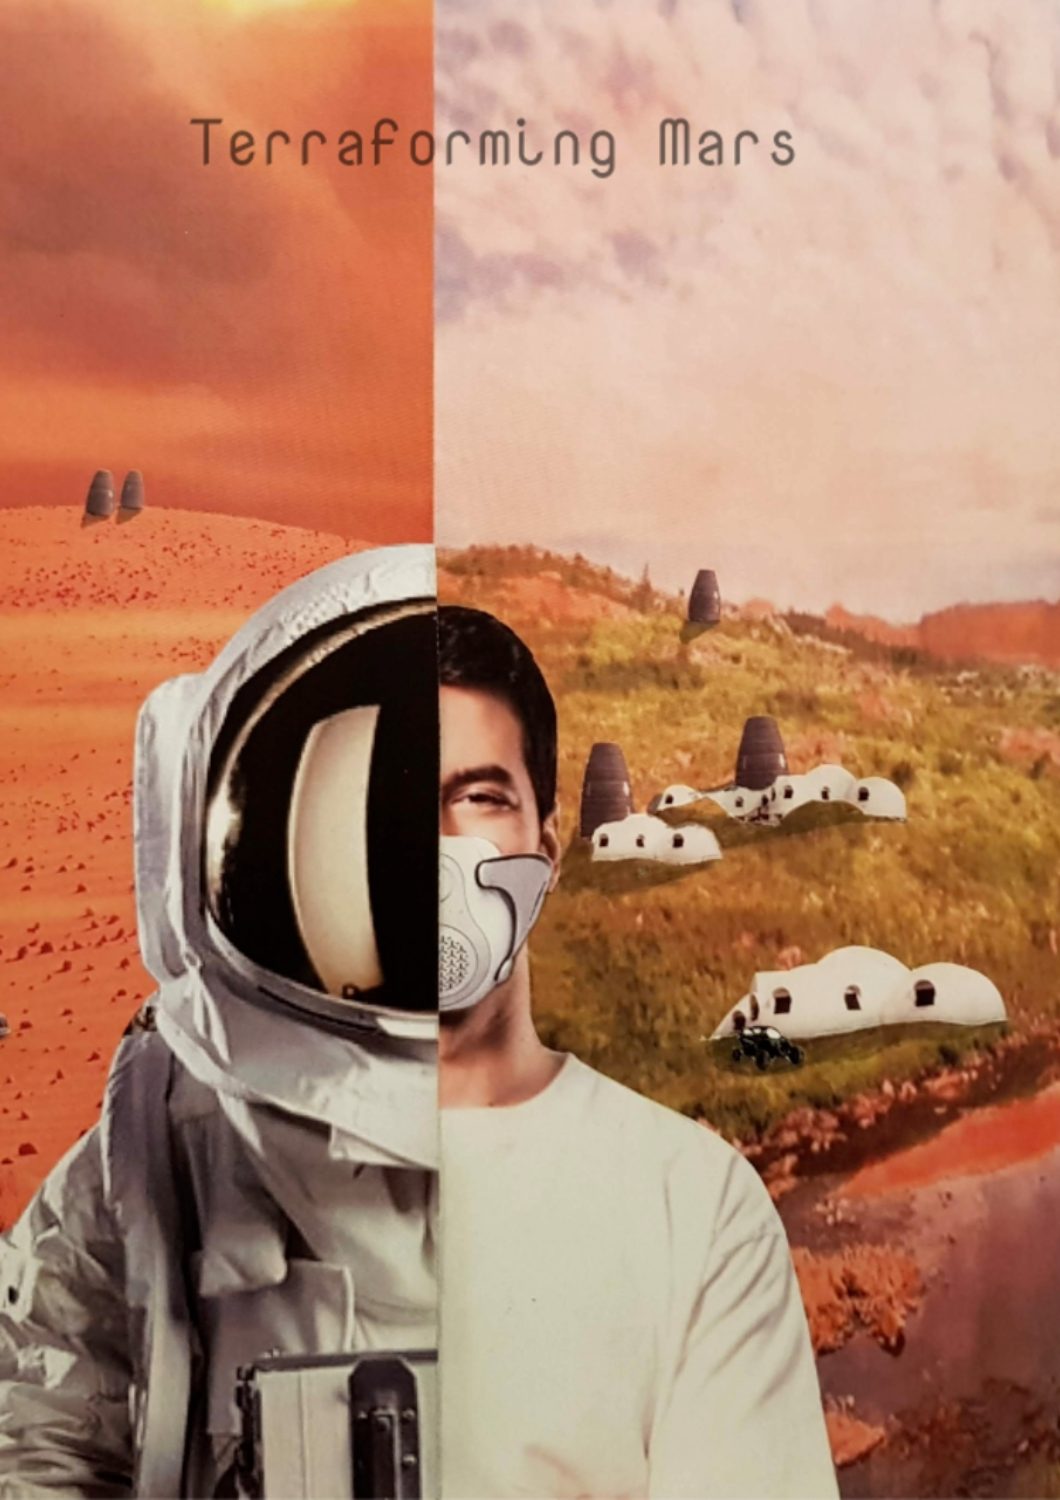 Postcards from Mars